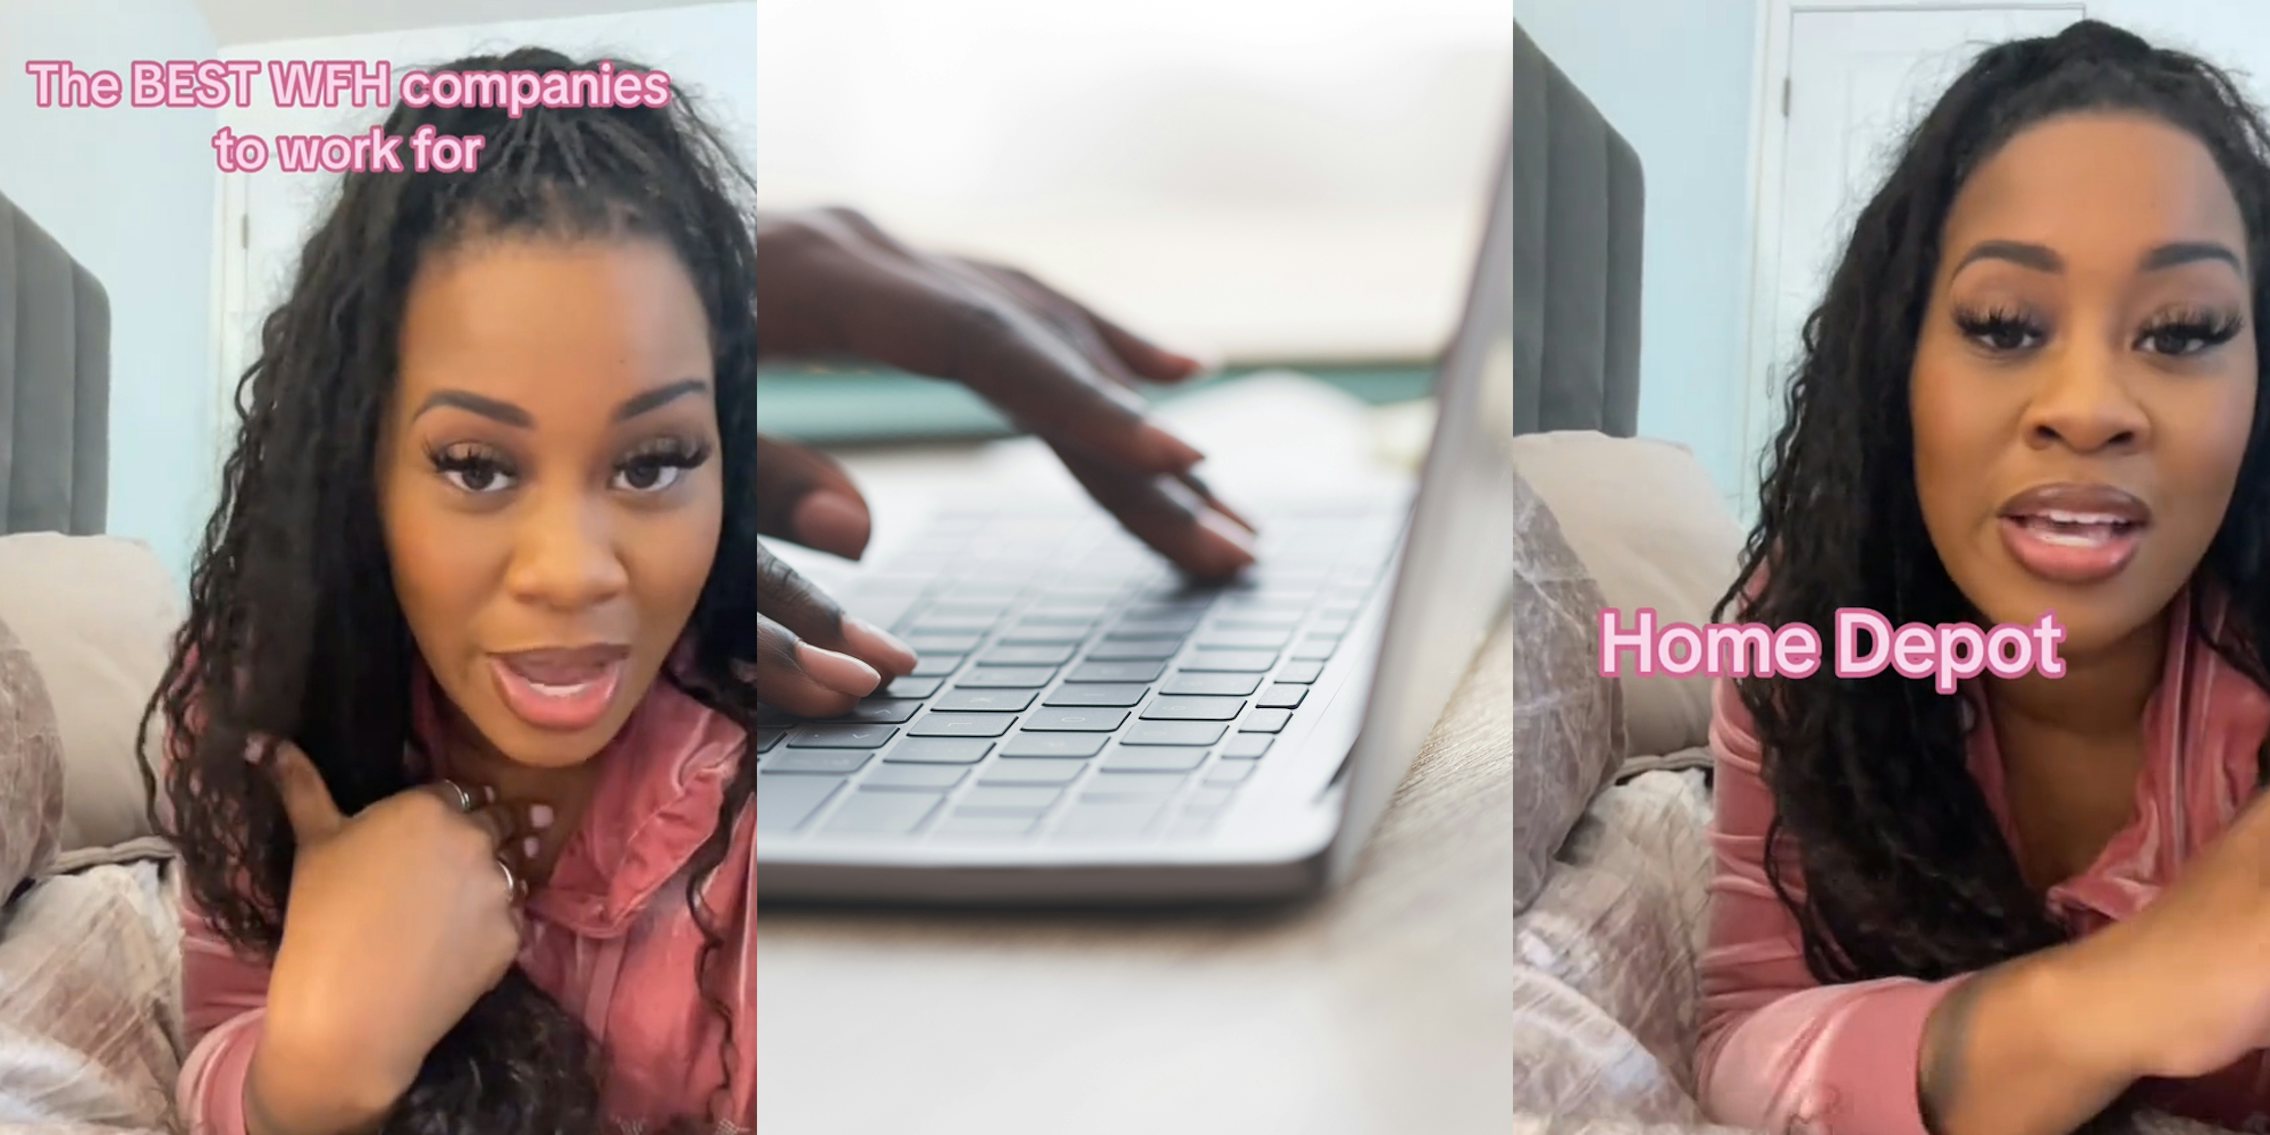 woman speaking with caption 'The BEST WFH companies to work for' (l) hands typing on laptop (c) woman speaking with caption 'Home Depot' (r)